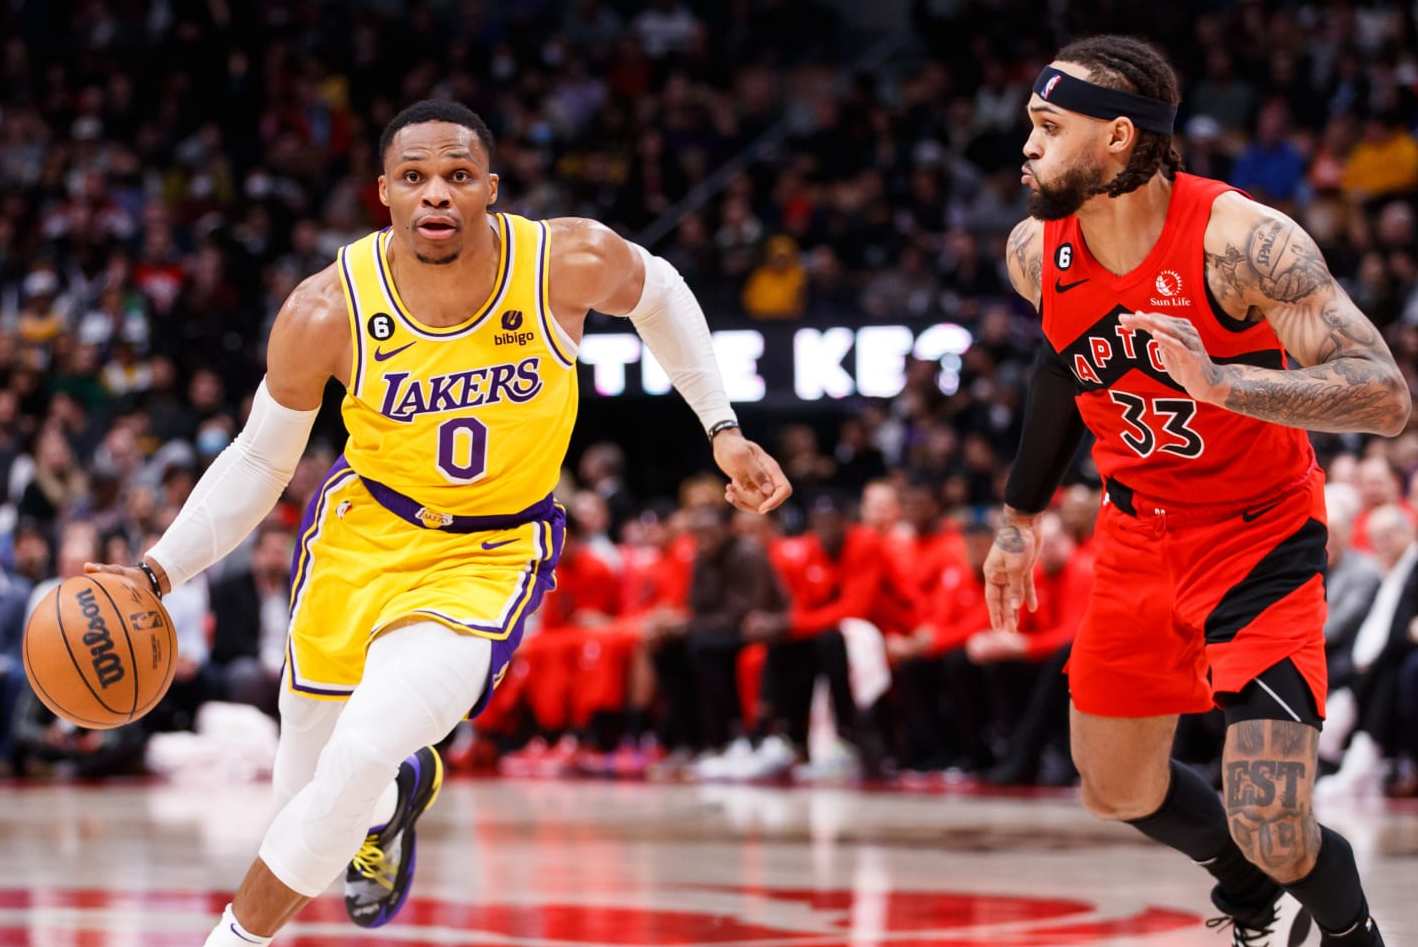 Raptors At Lakers Live In VR escapeauthority